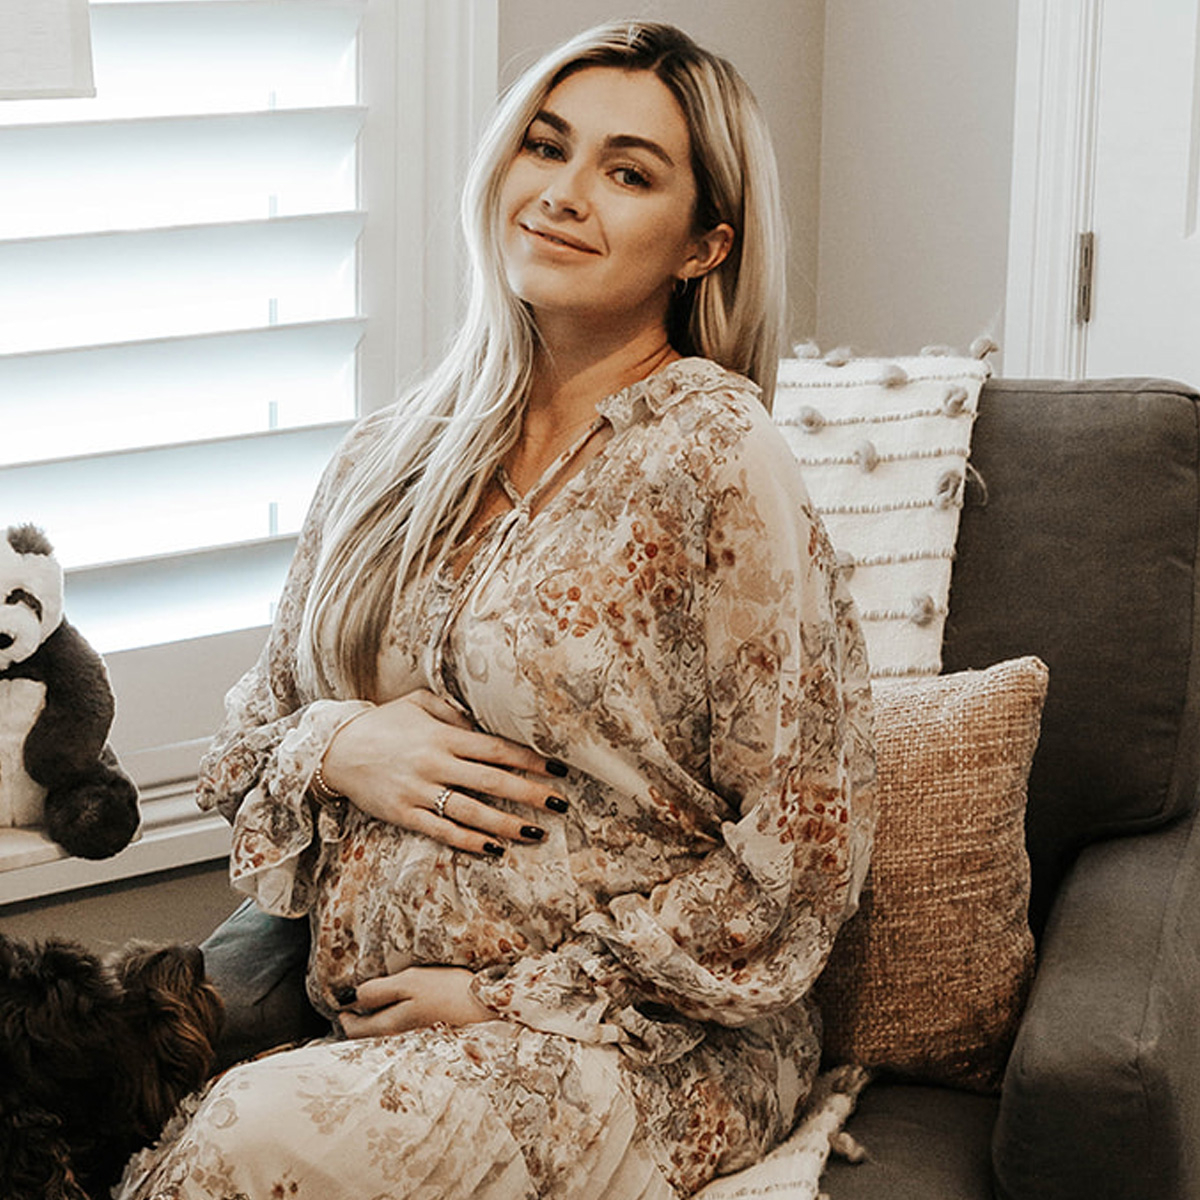 DWTS Pro Lindsay Arnold Gives Birth to Baby Girl